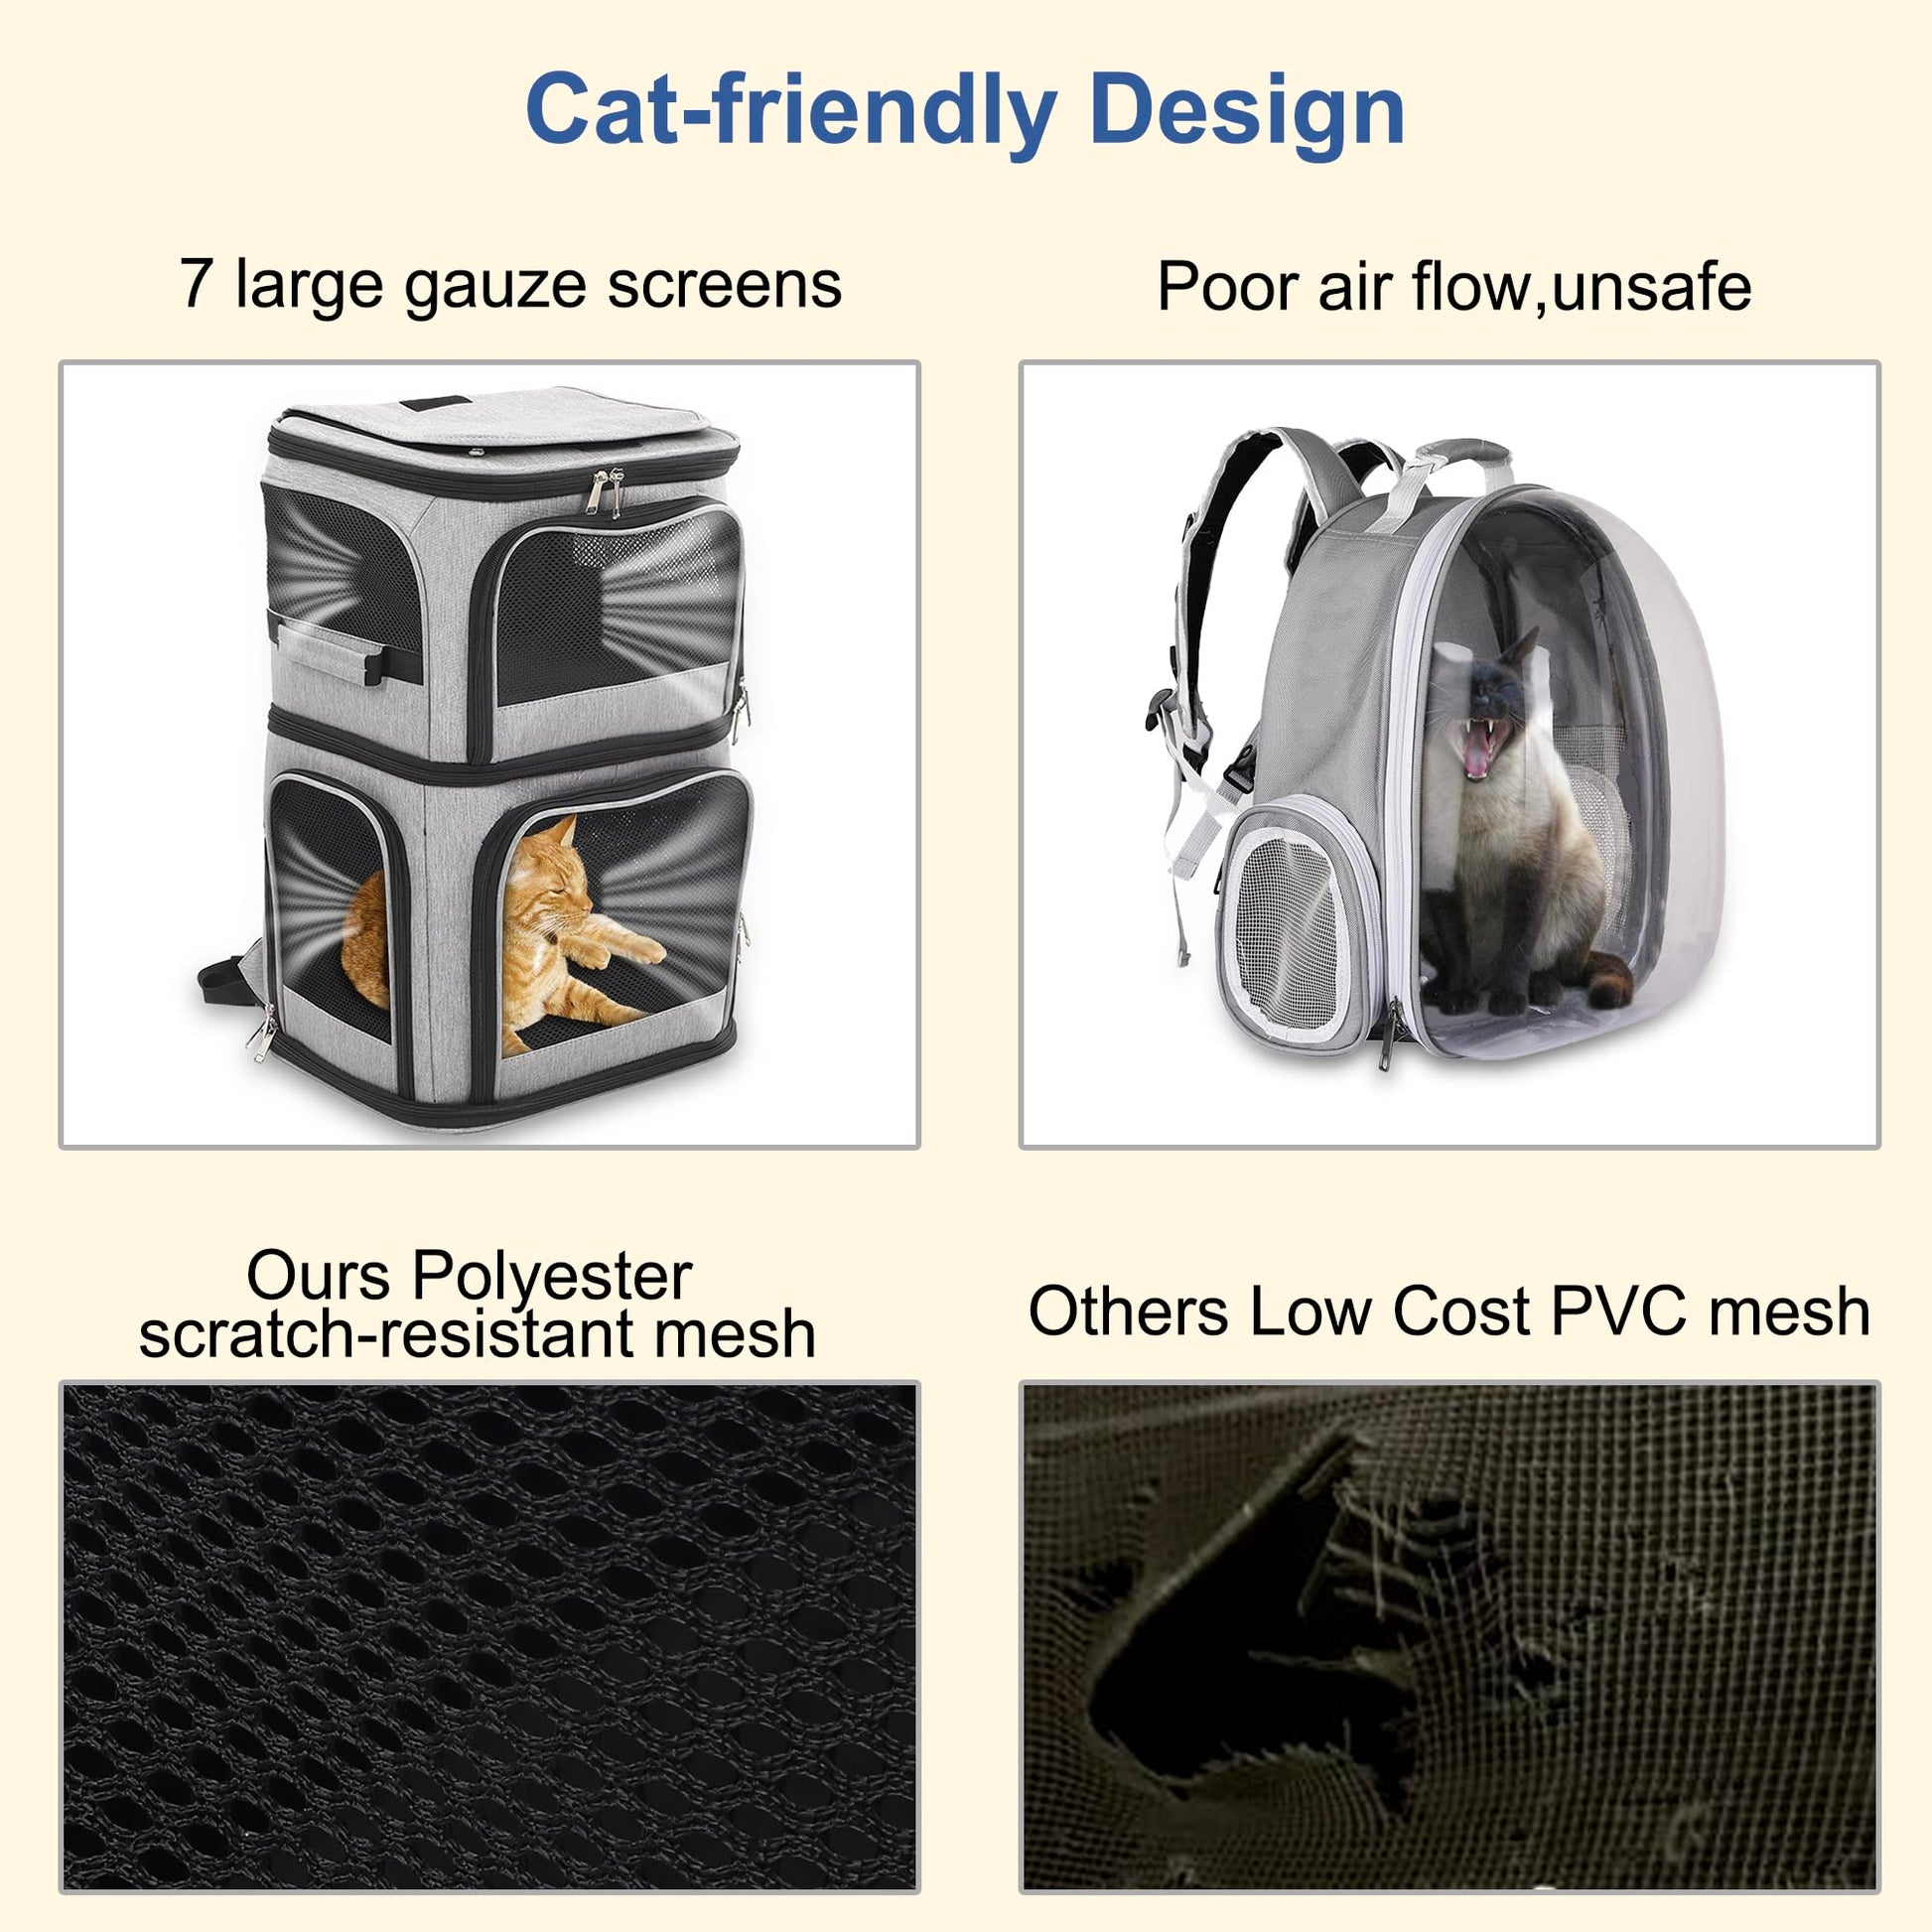 Double Pet Carrier Backpack, Double-Compartment Pet Cat Carrier Travel for 2 Small Cats or Dogs, Cat Carrier Backpack Large Size Portable Breathable, Perfect for Travel/Hiking/Camping Outdoor